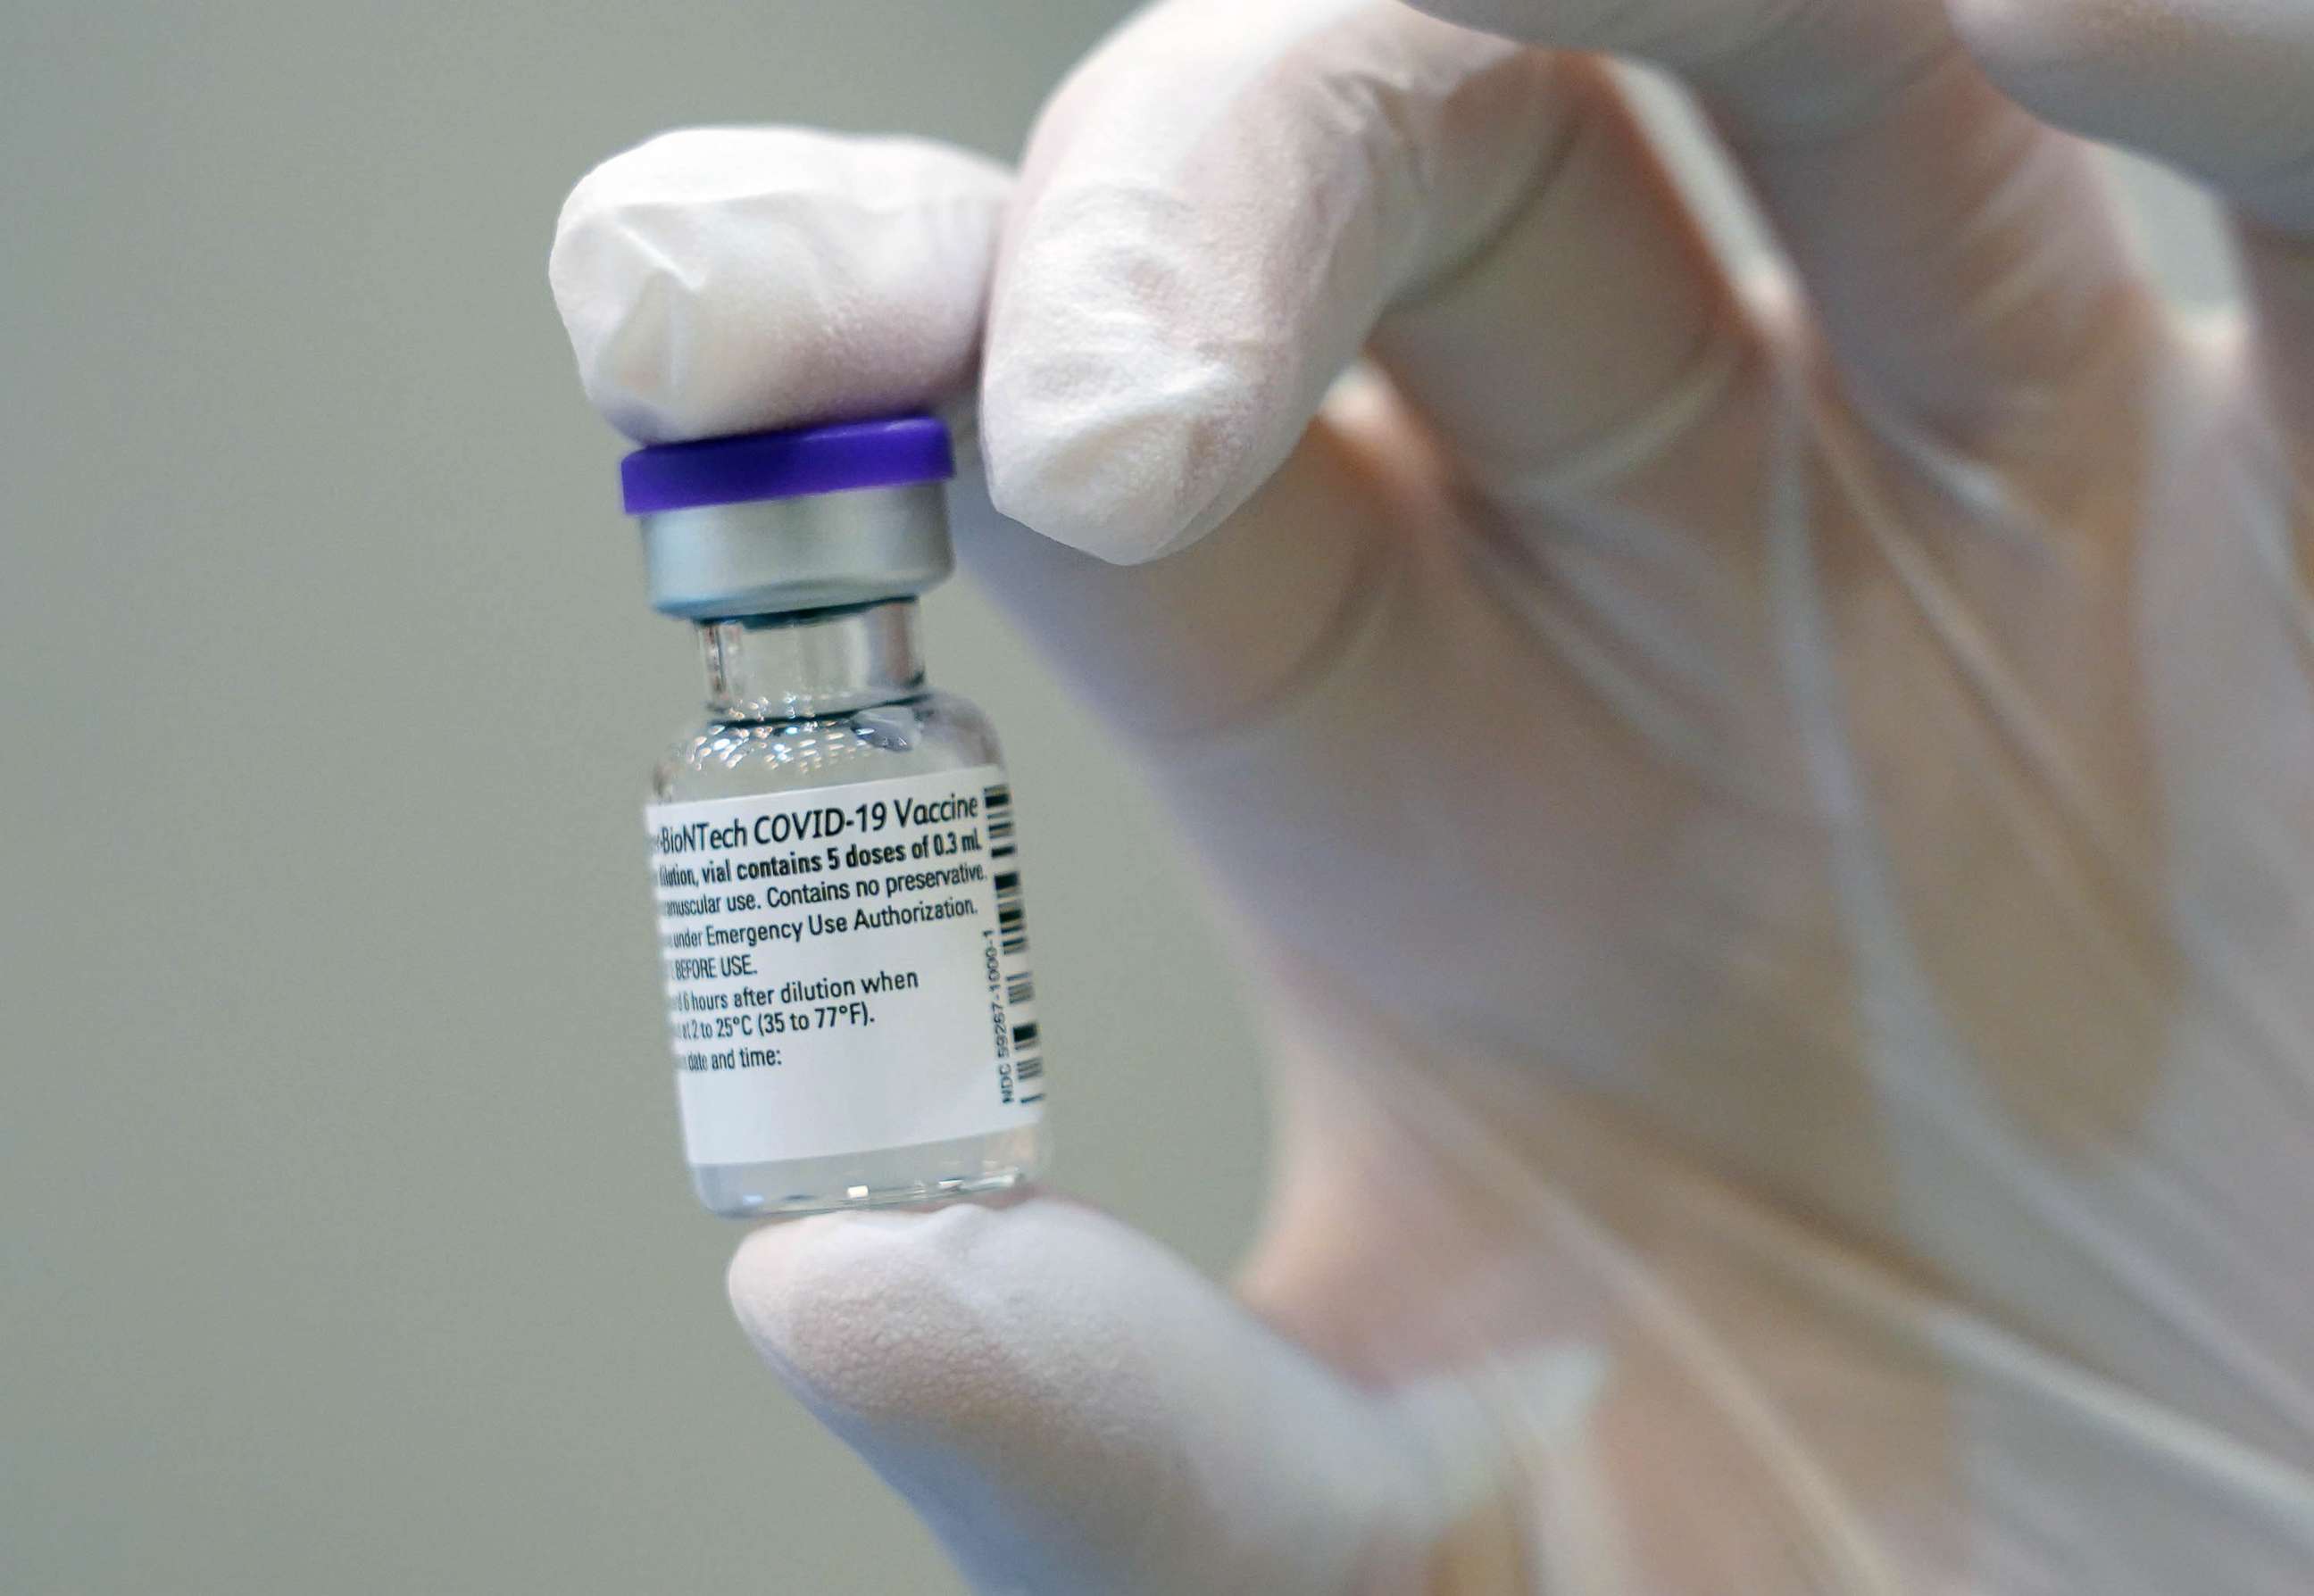 PHOTO: A doctor holds up a bottle of the Pfizer/BioNTech vaccine against Covid-19 at the vaccination center on Jan. 5, 2021 in Potsdam, Germany.